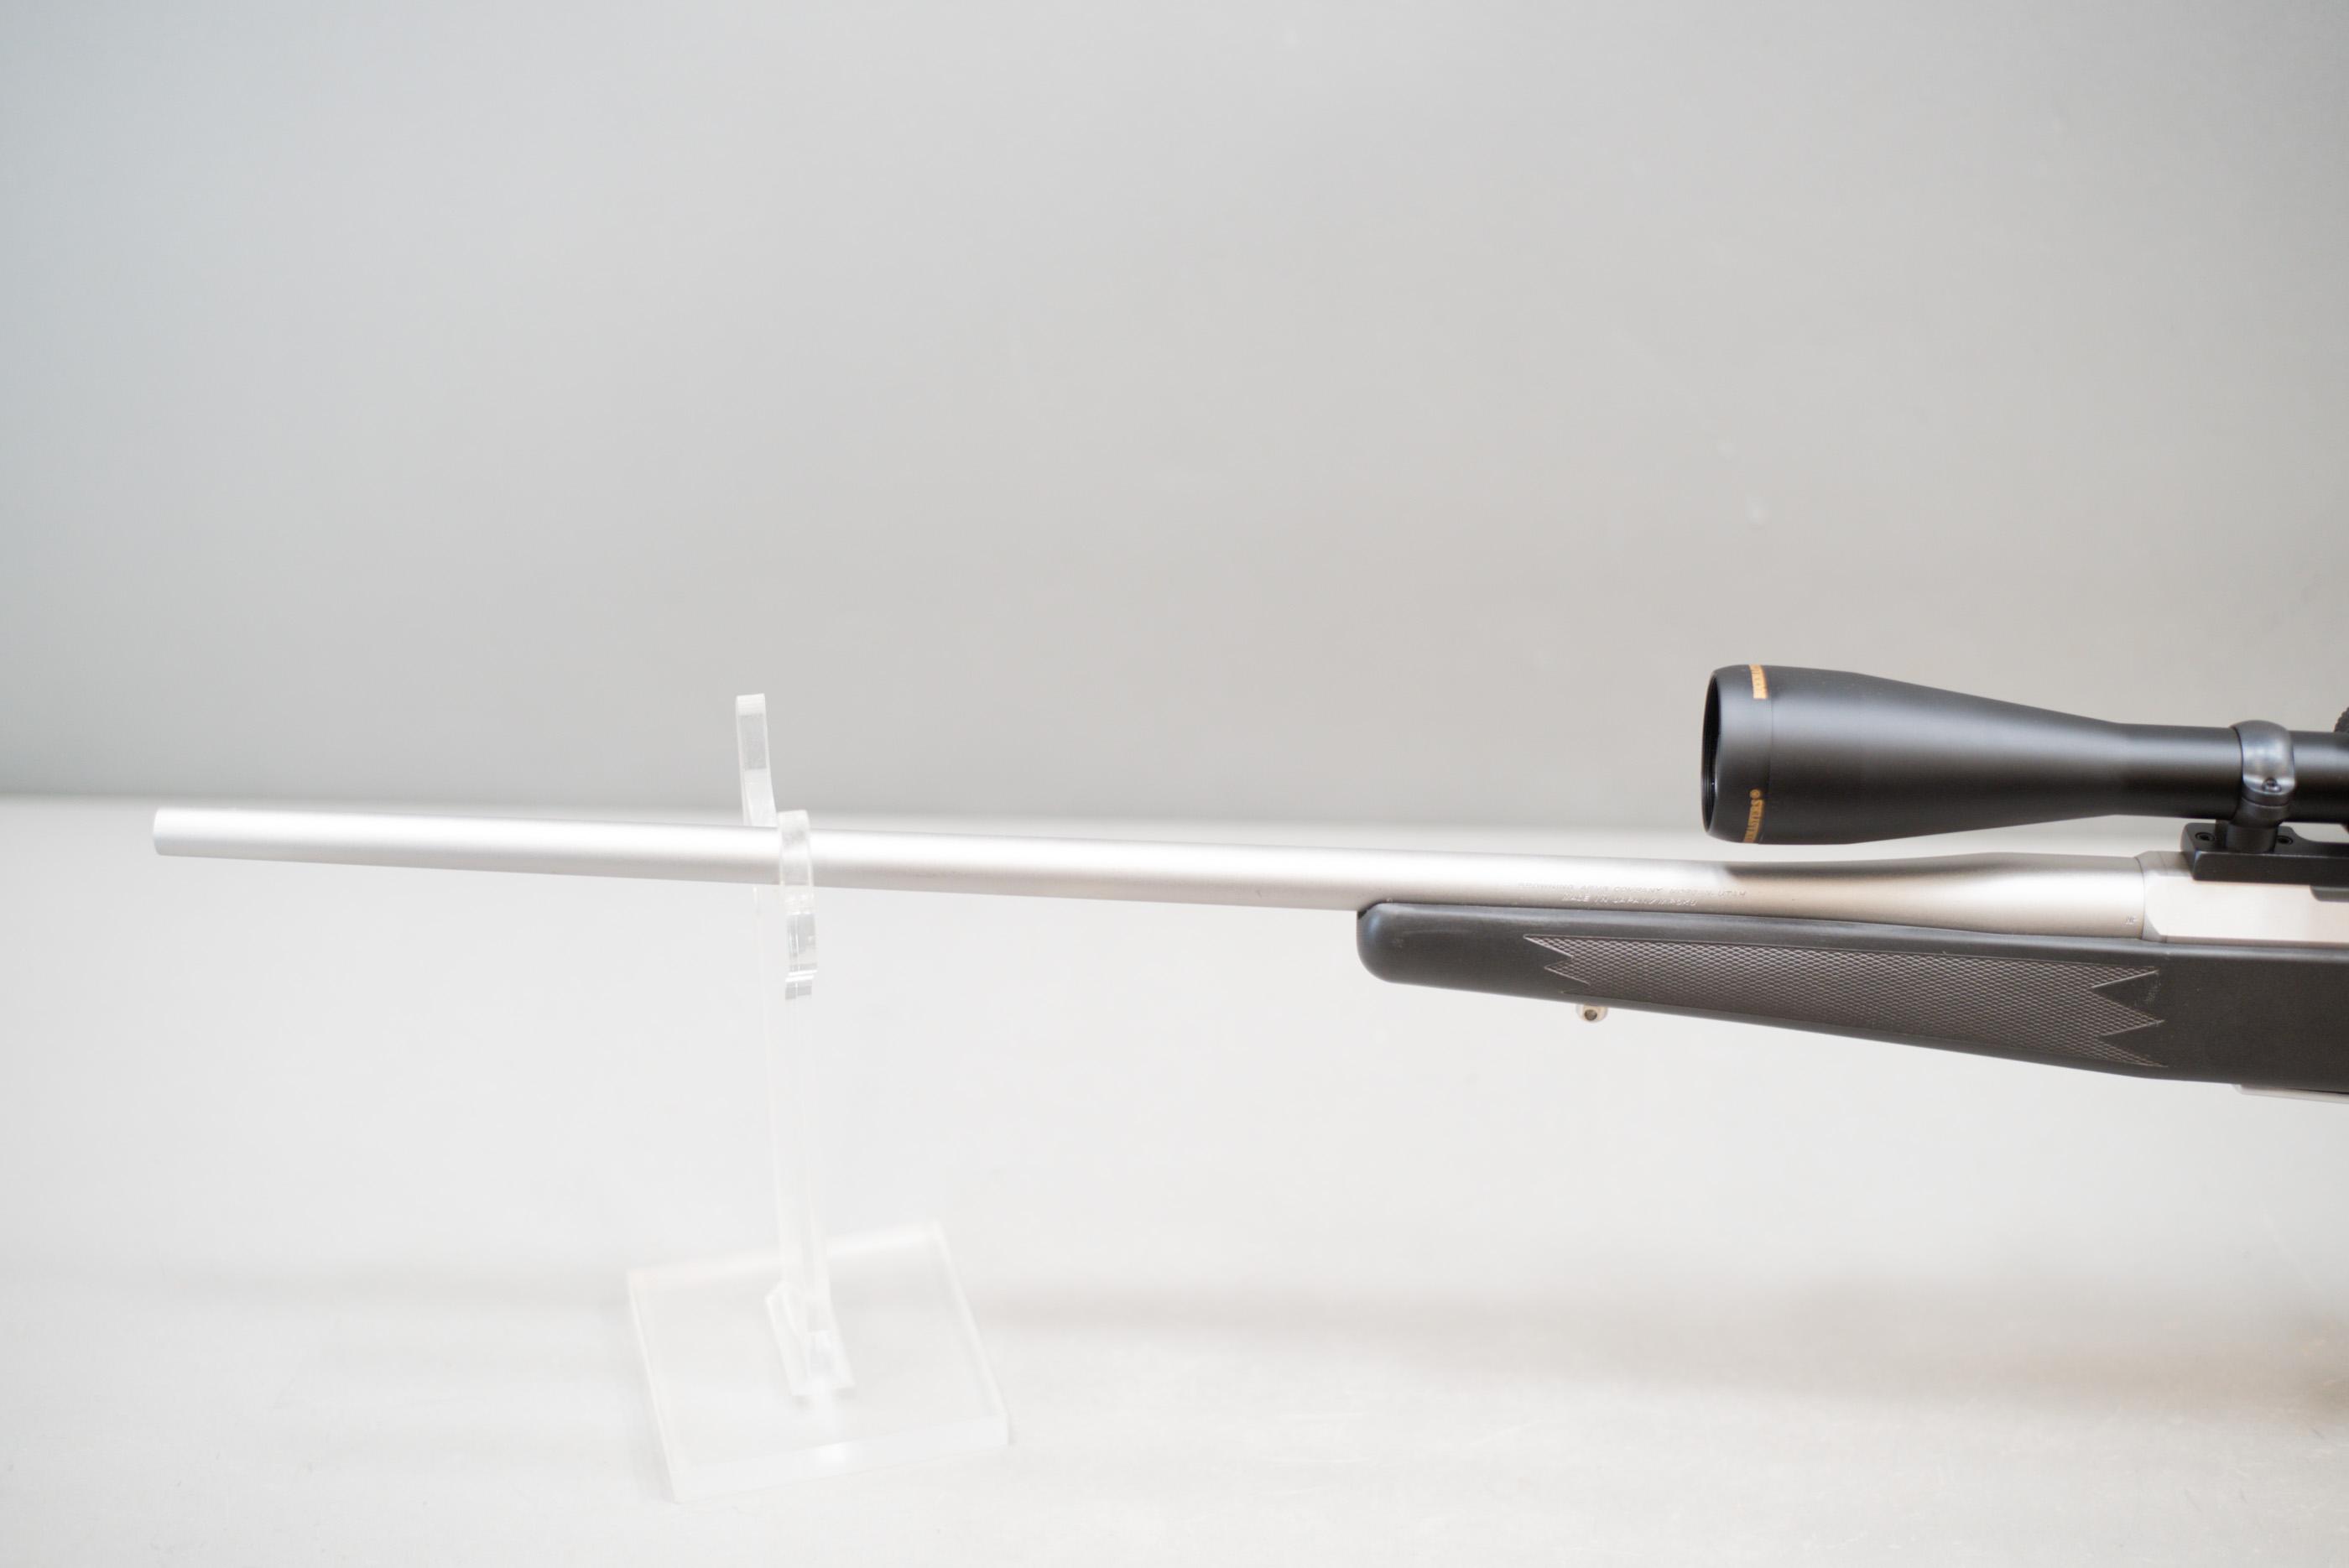 (R) Browning A-Bolt Stainless .300 WSM Only Rifle